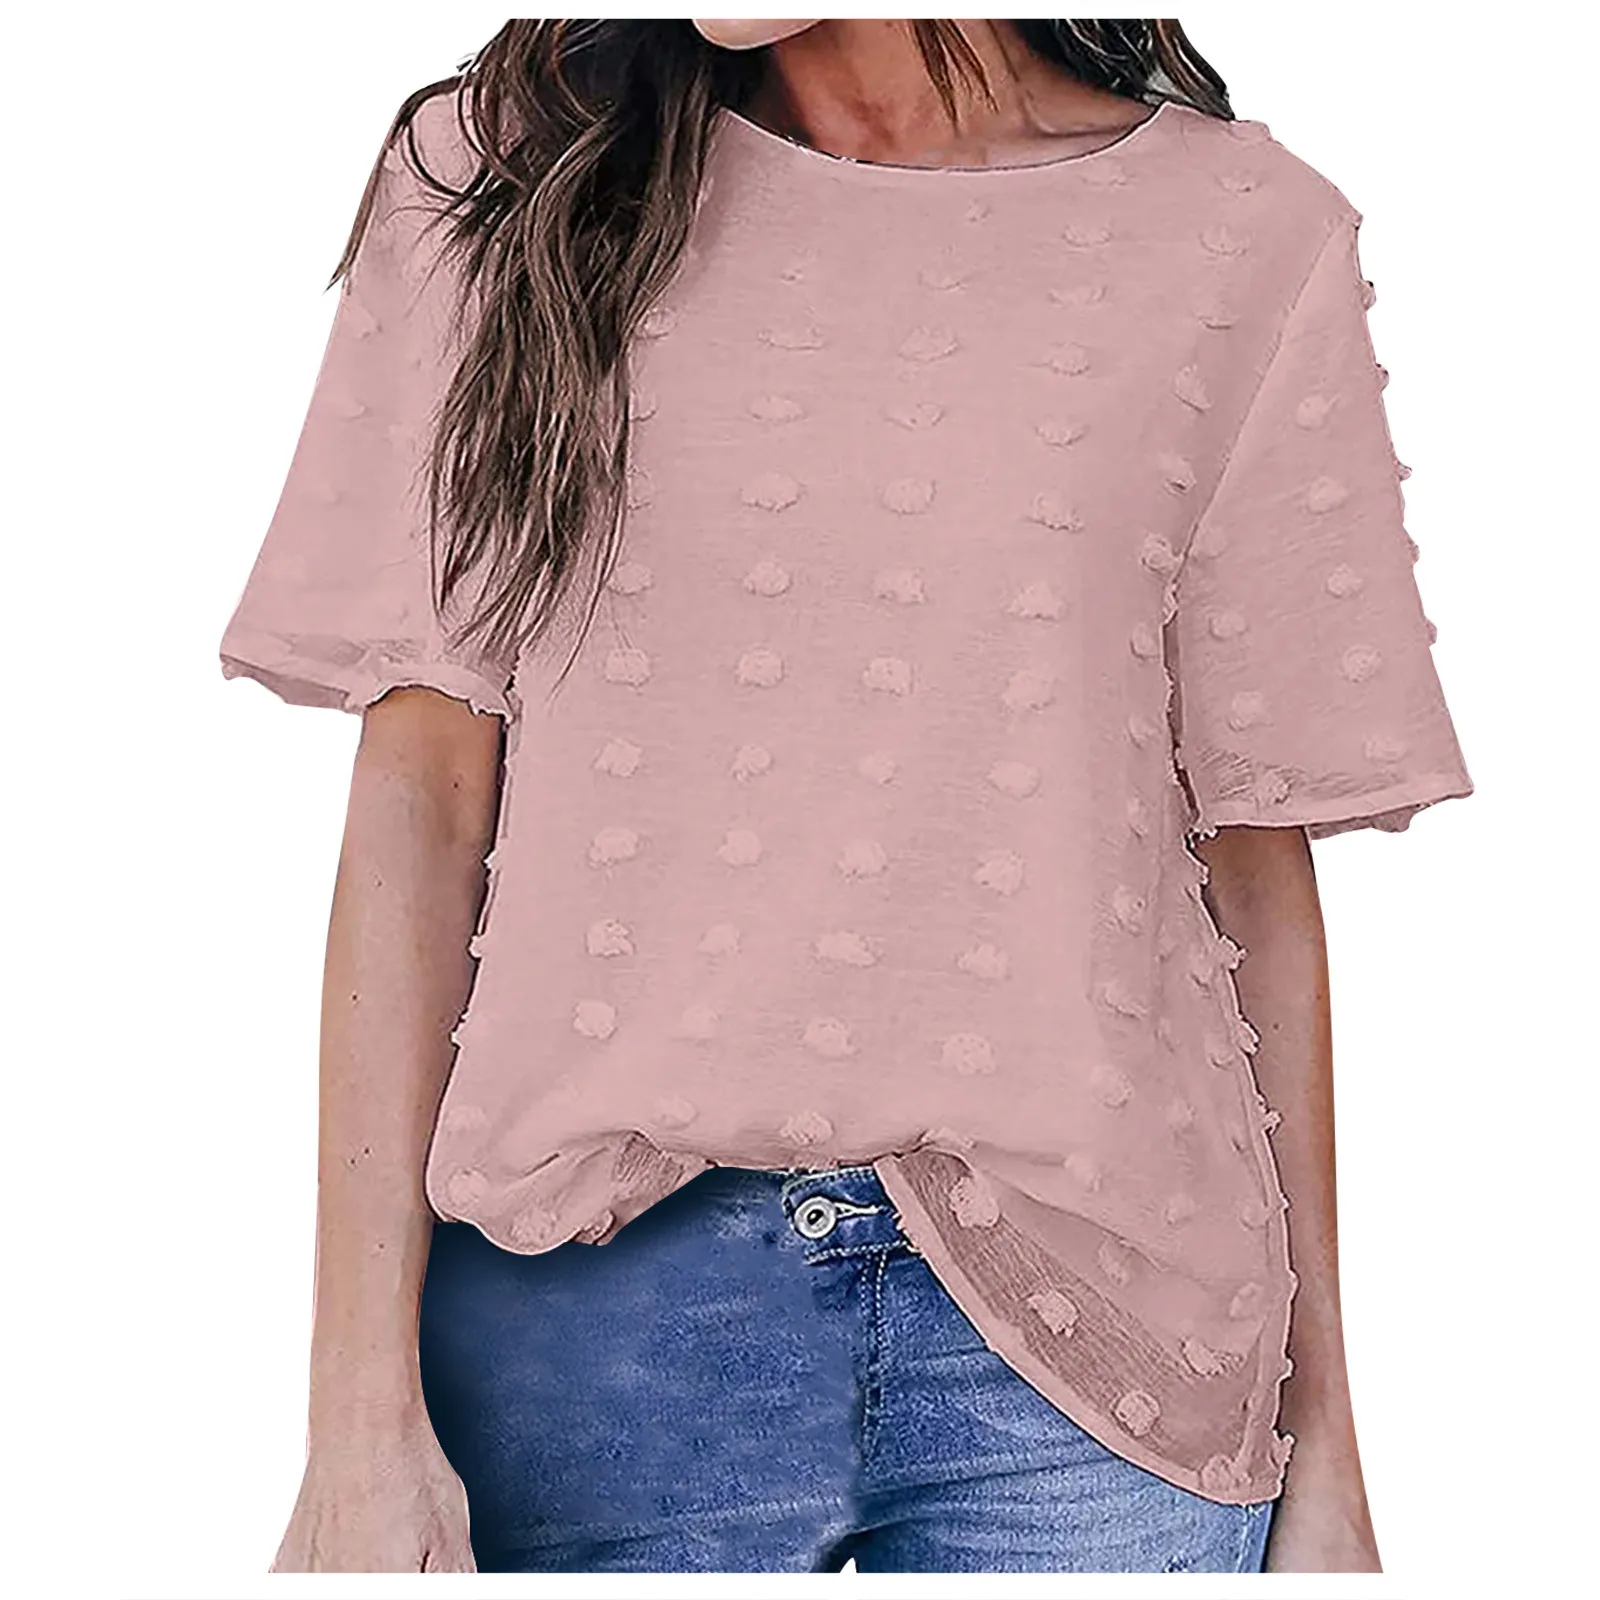 New Women's Dress Women Fashion Short Sleeve Round Neck Solid Color T ...